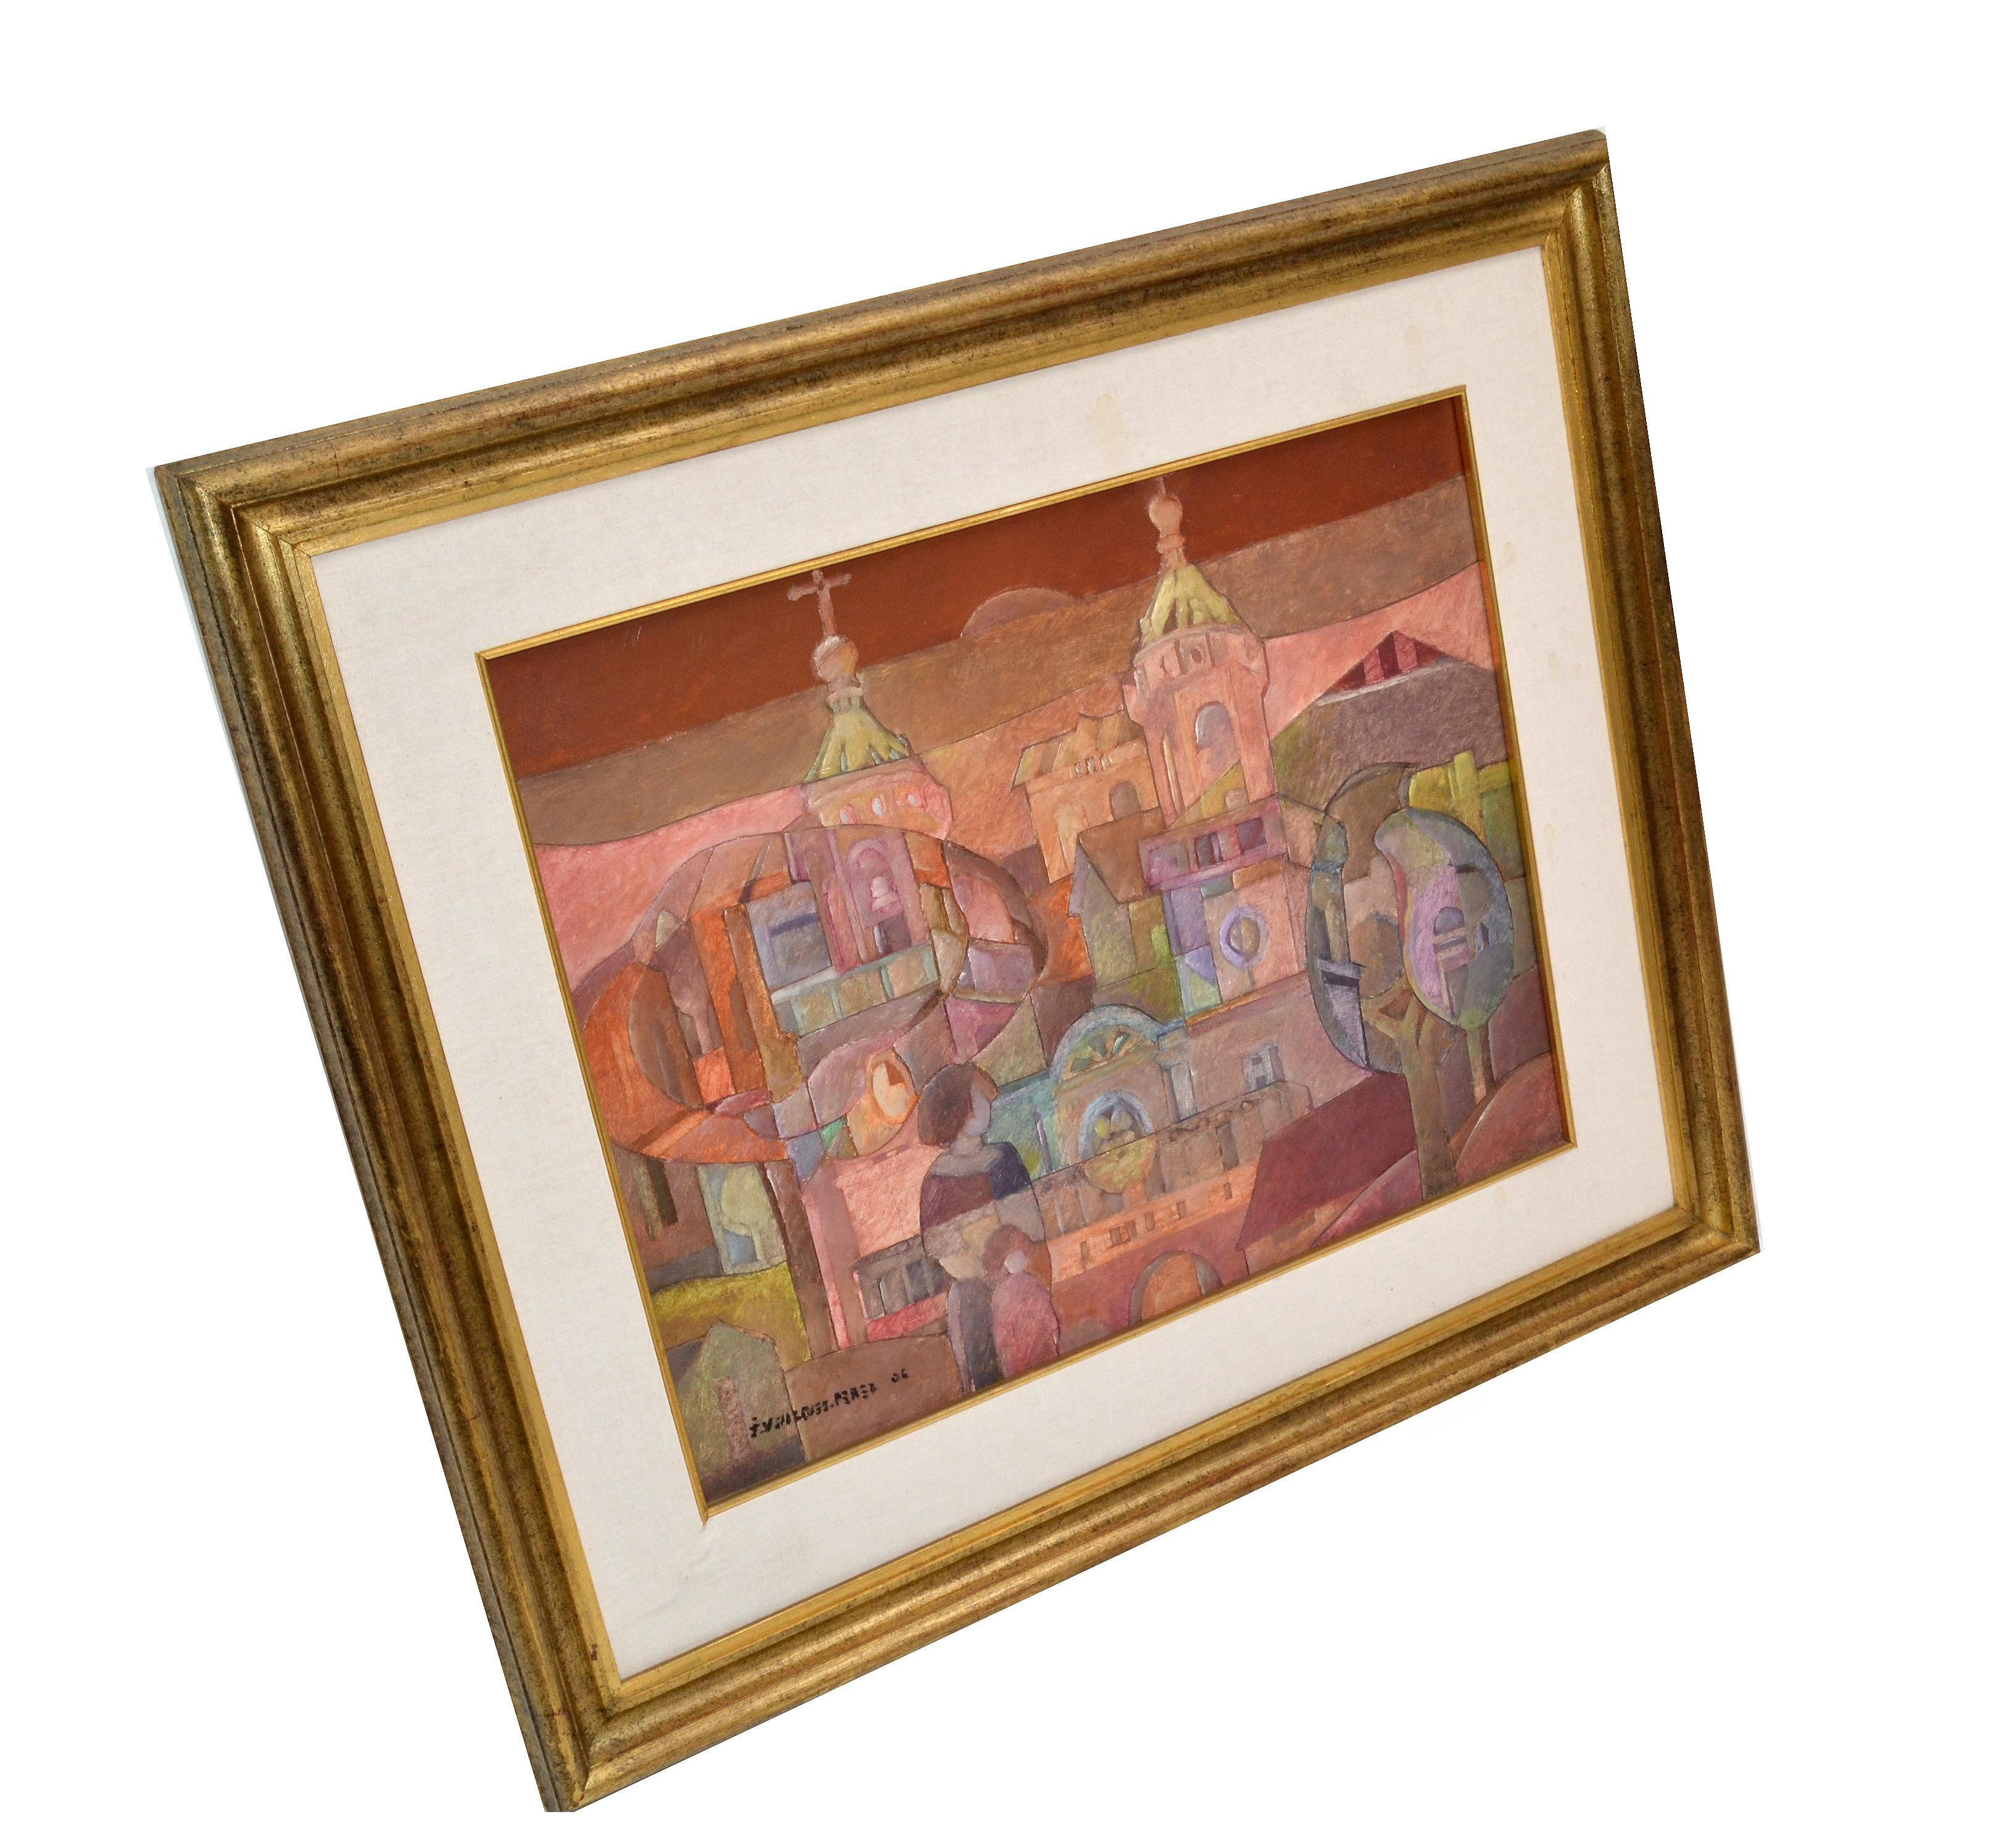 Hand-Painted Signed Golden Framed South American Art Well-Known Uruguay Artist Painting 2006 For Sale